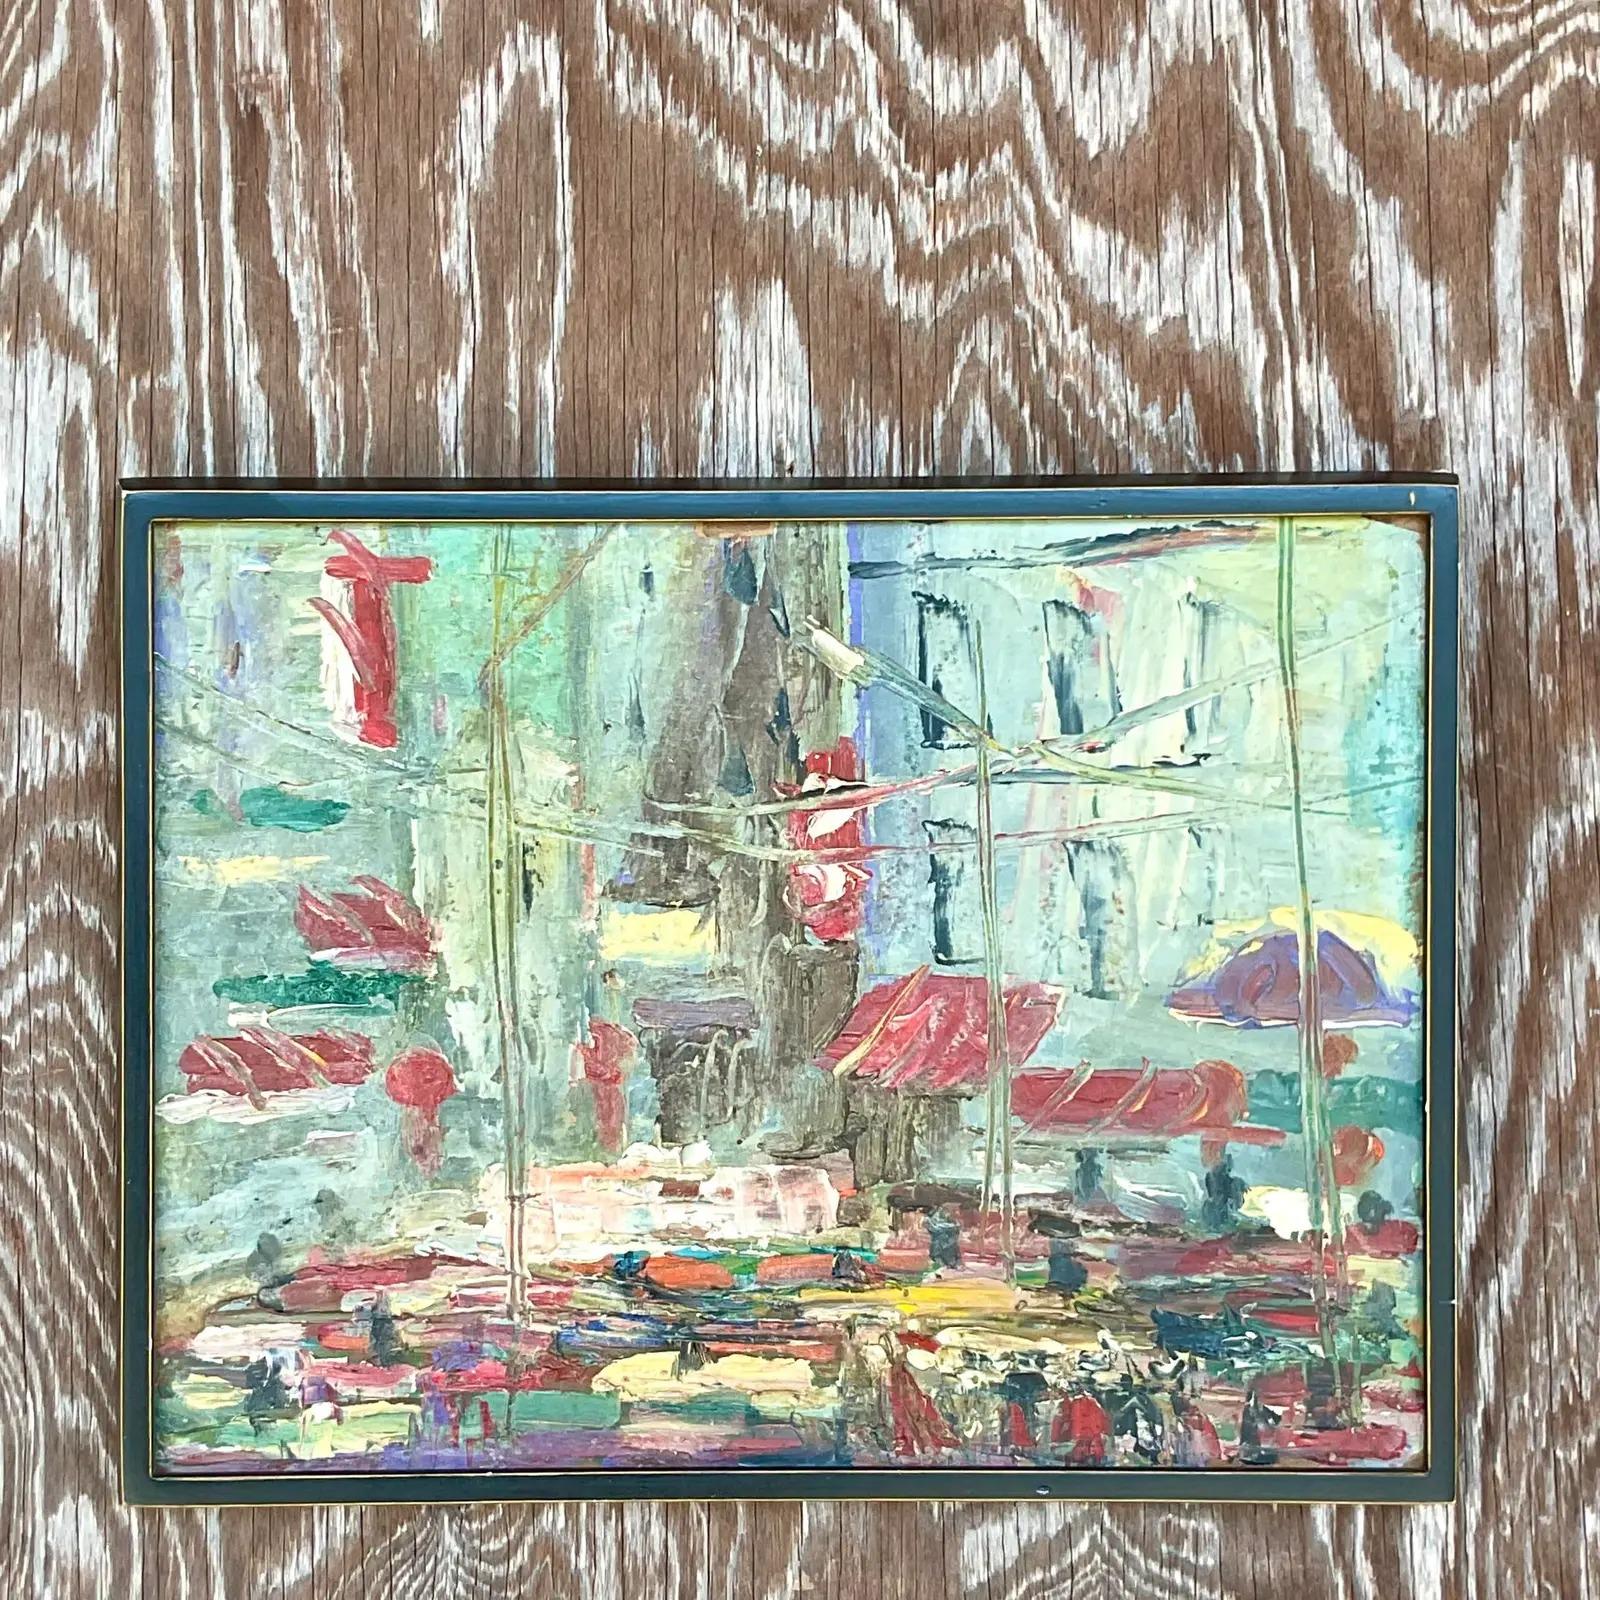 A fabulous vintage Original oil painting. A chic impasto style Abstract expressionist composition of a French street scene. A charming work. Acquired from a Palm Beach estate.